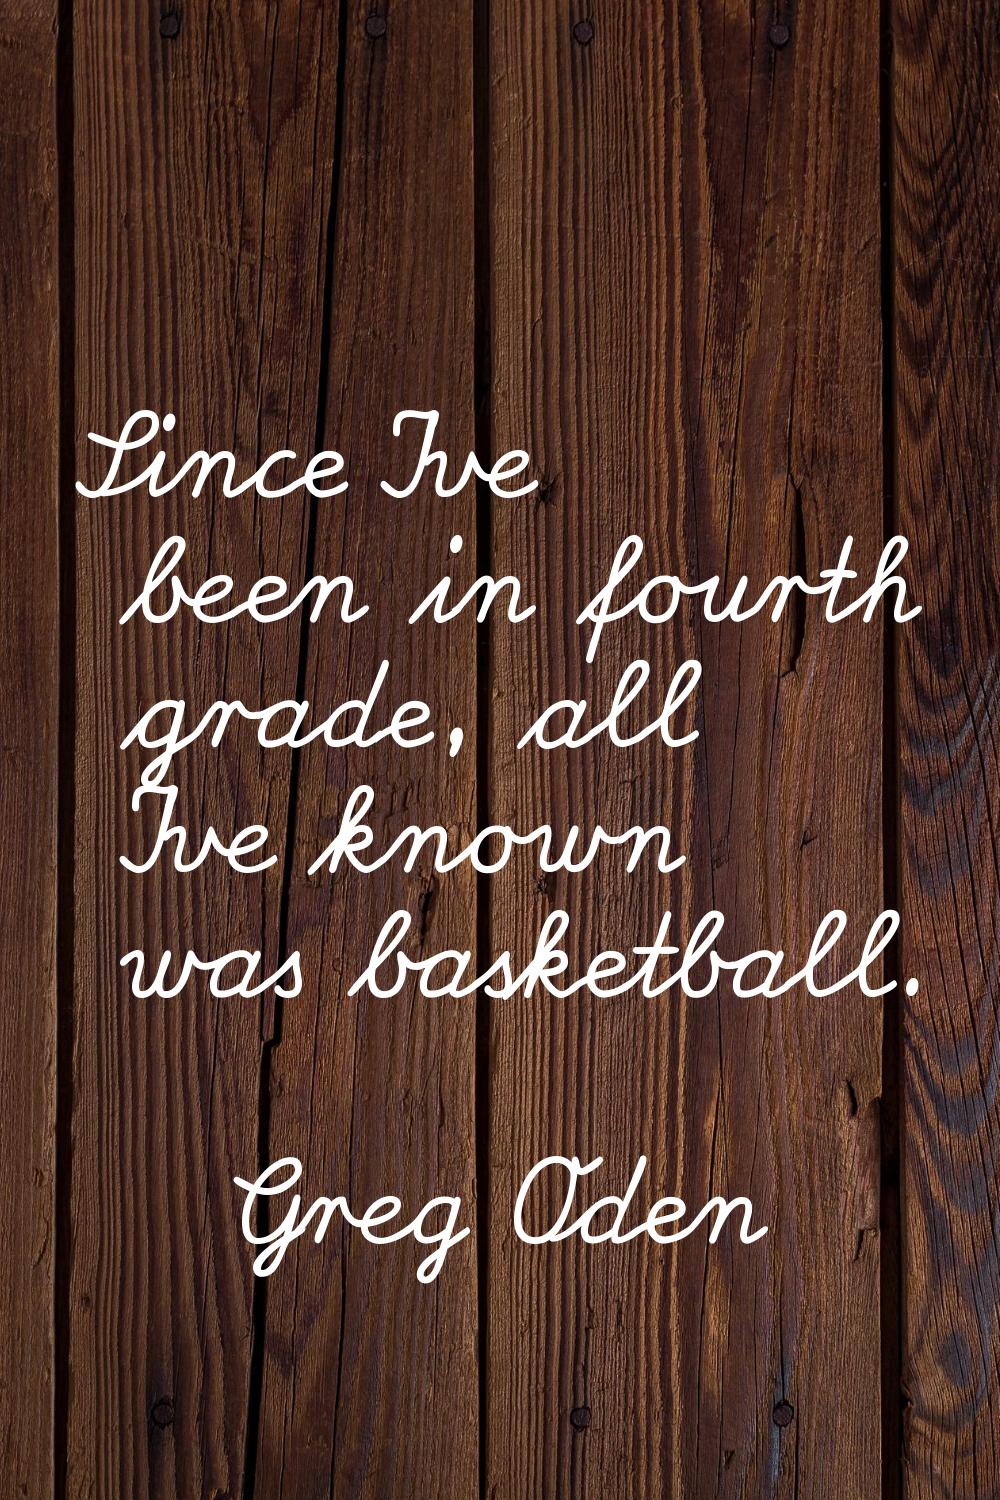 Since I've been in fourth grade, all I've known was basketball.